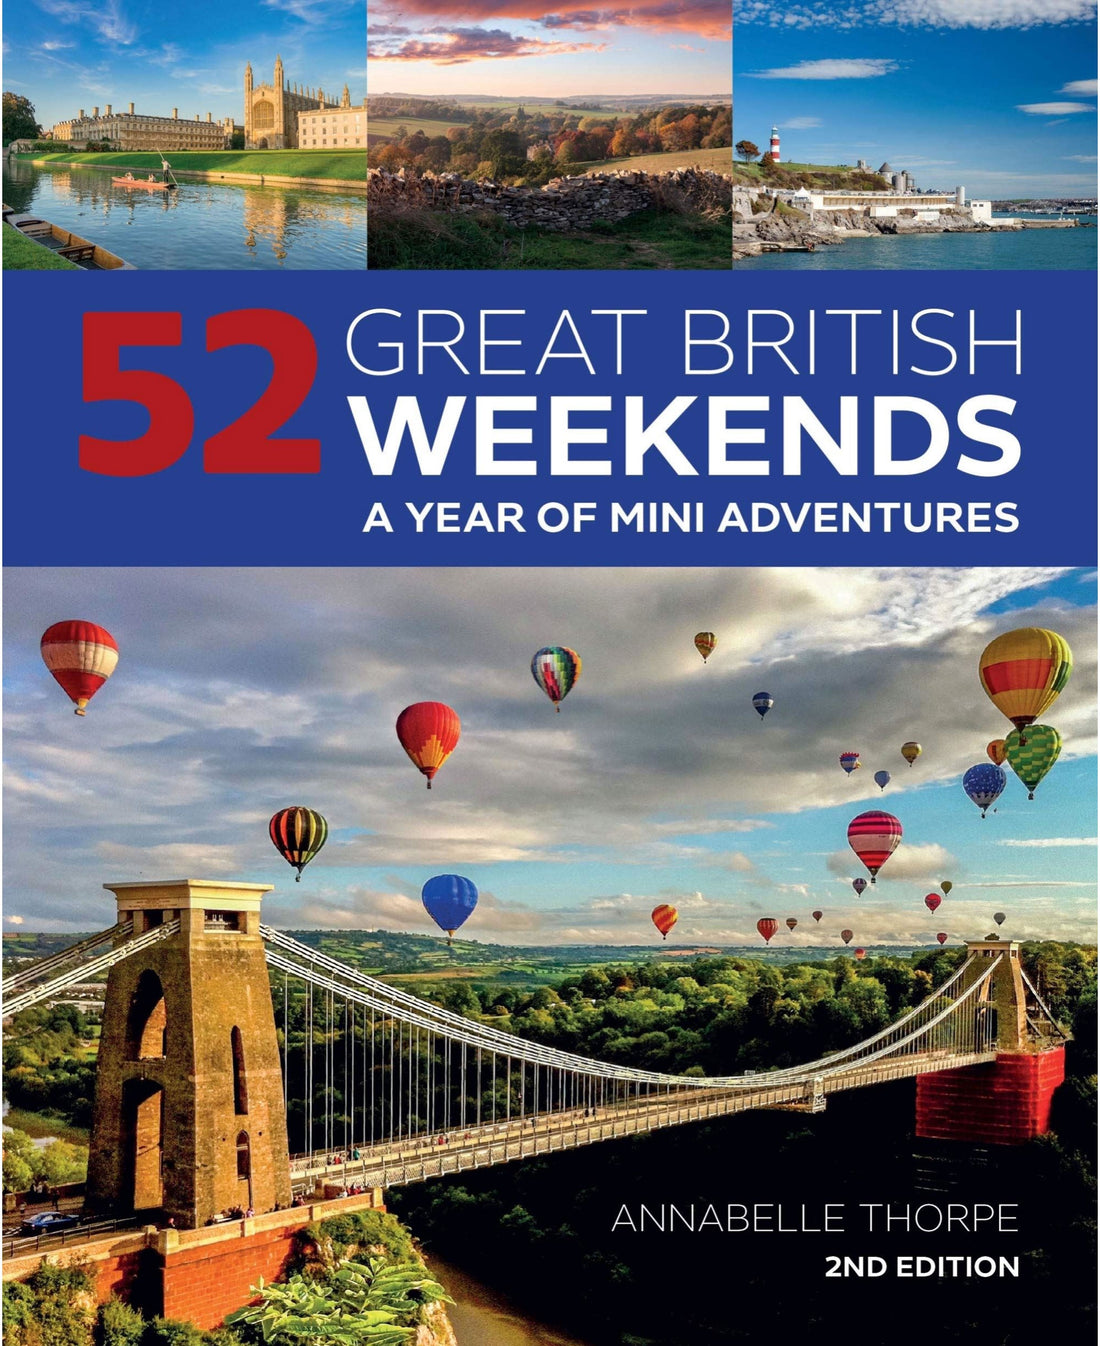 52 Great British Weekends by Annabelle Thorpe